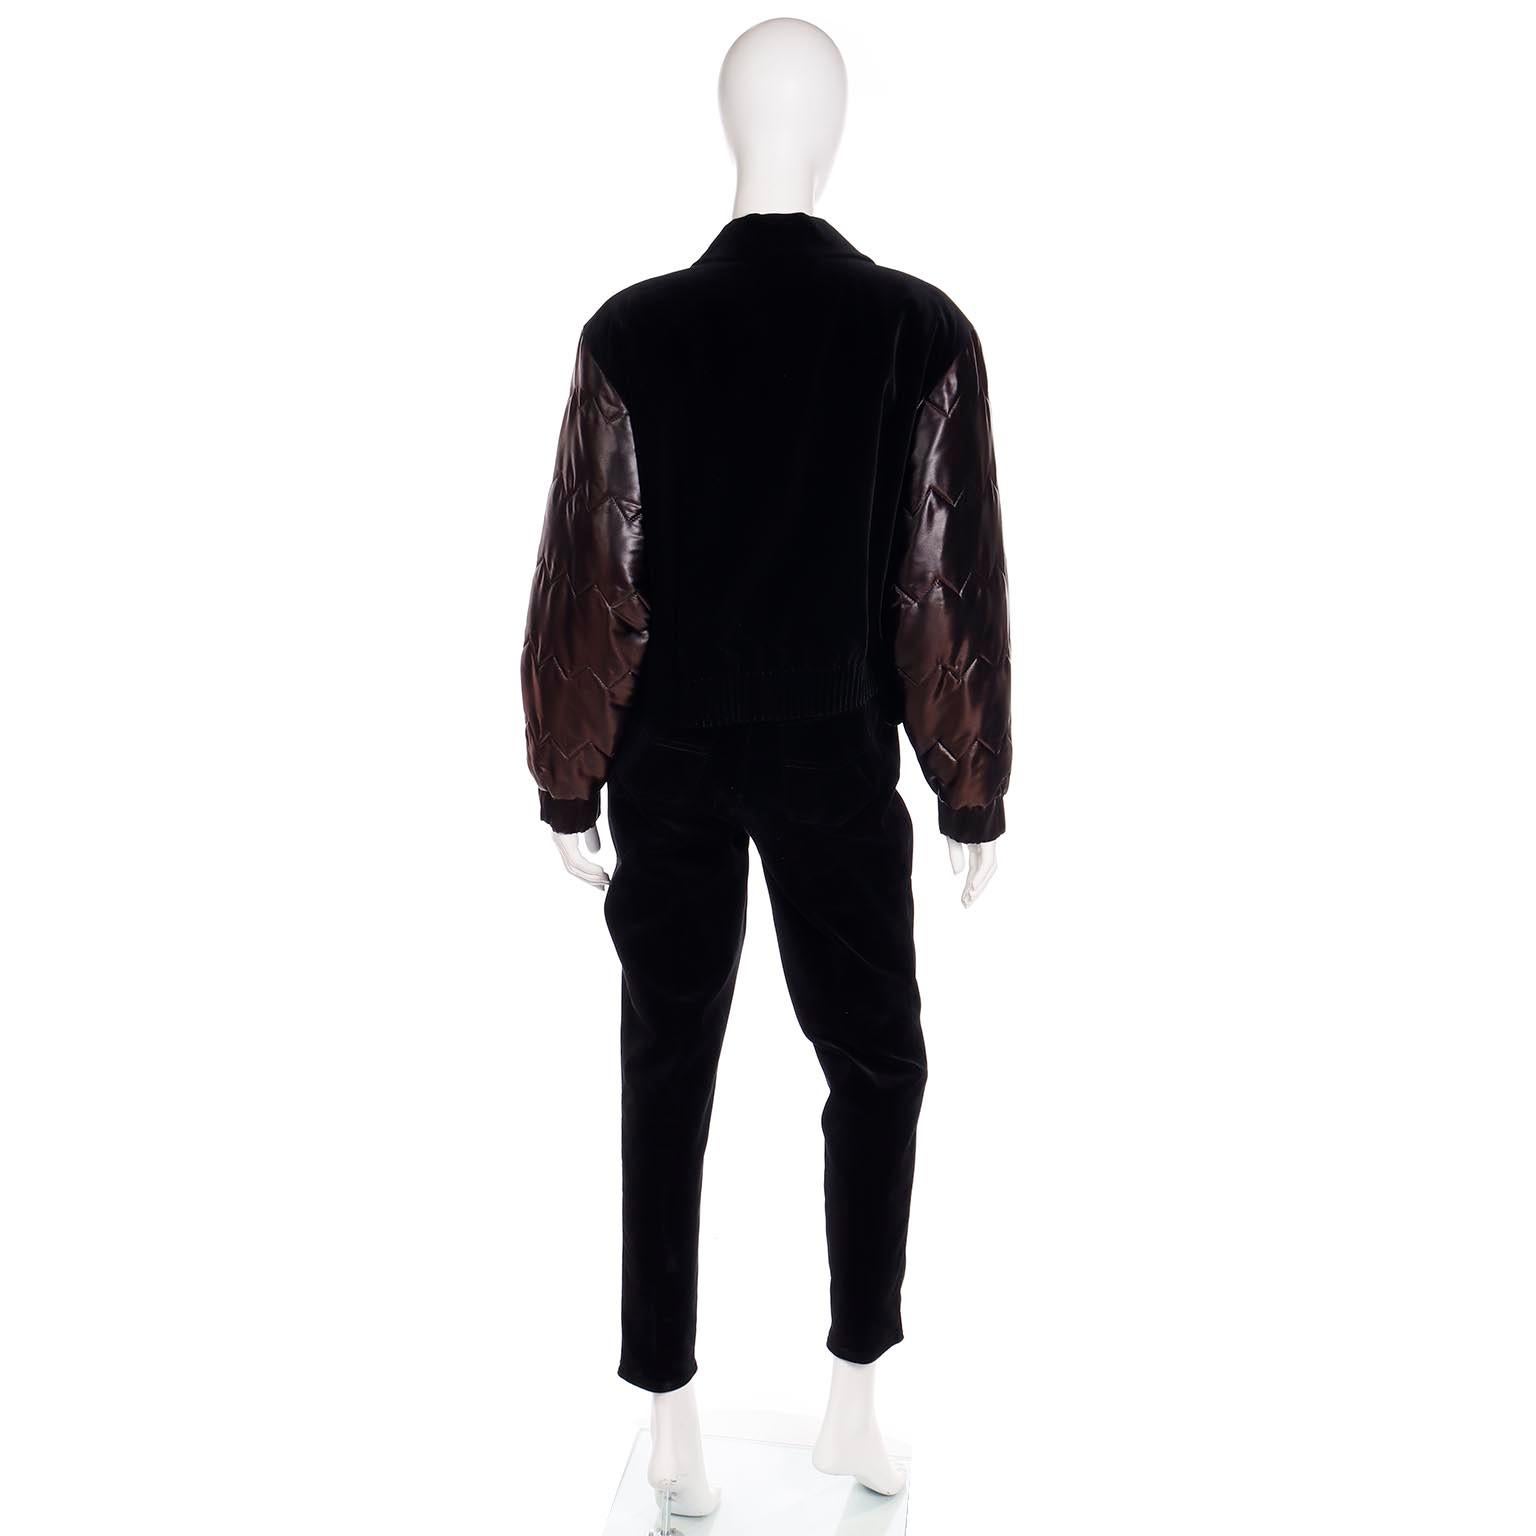 Vintage Louis Feraud Black Bomber Jacket w Quilted Satin Sleeves & Pants Outfit For Sale 1